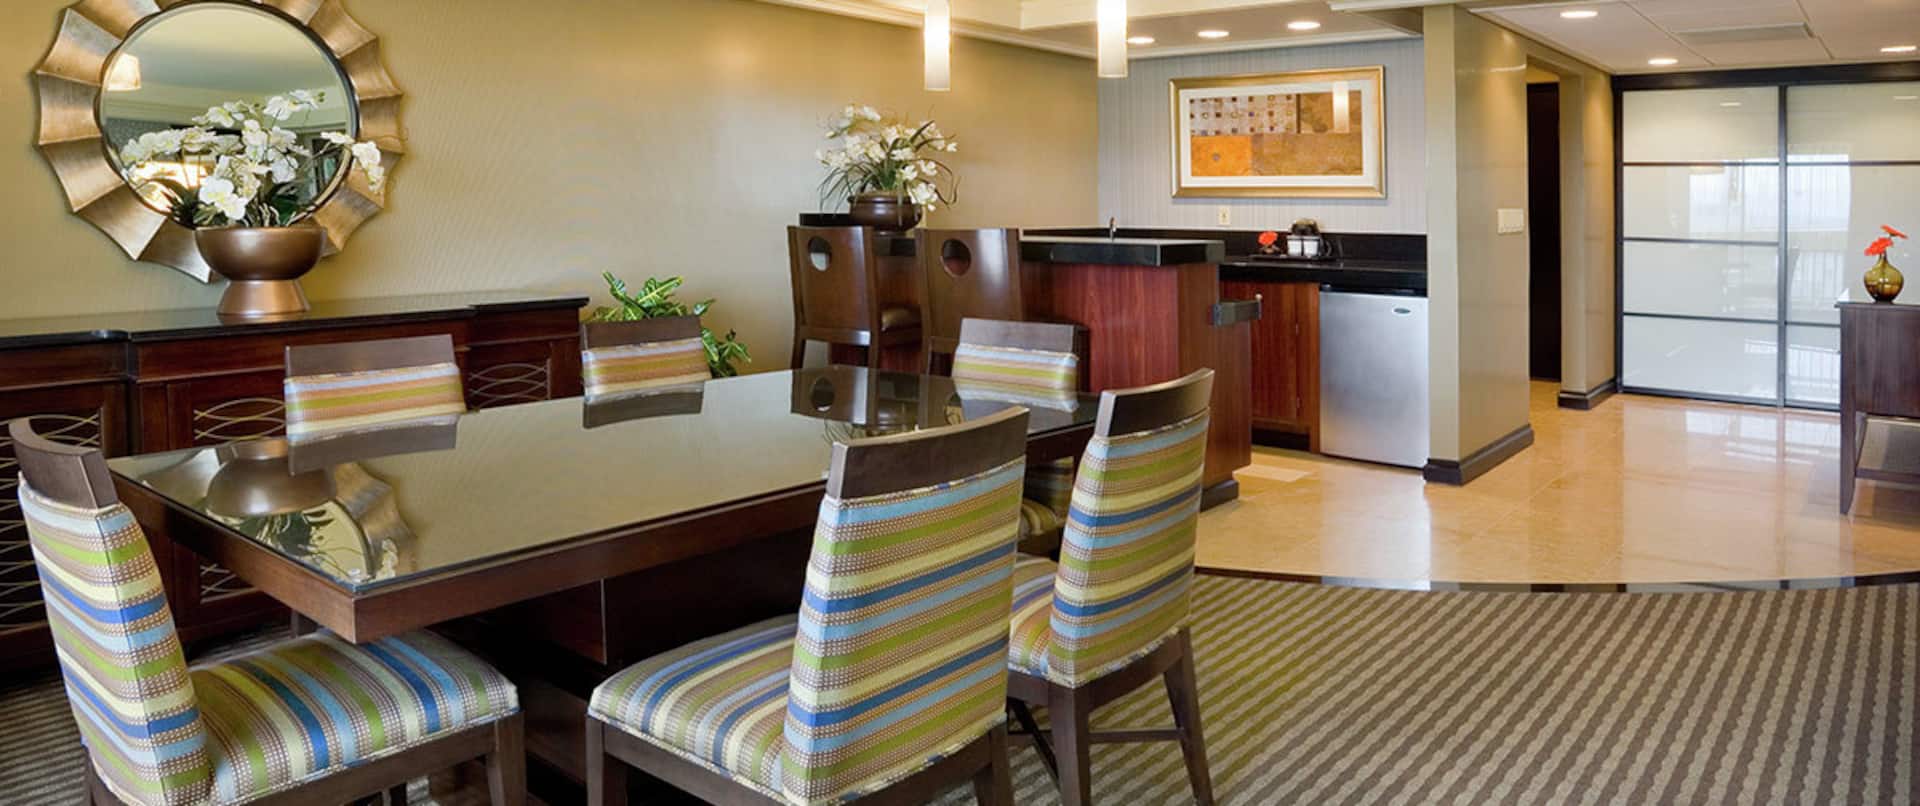 Presidential suite dining area